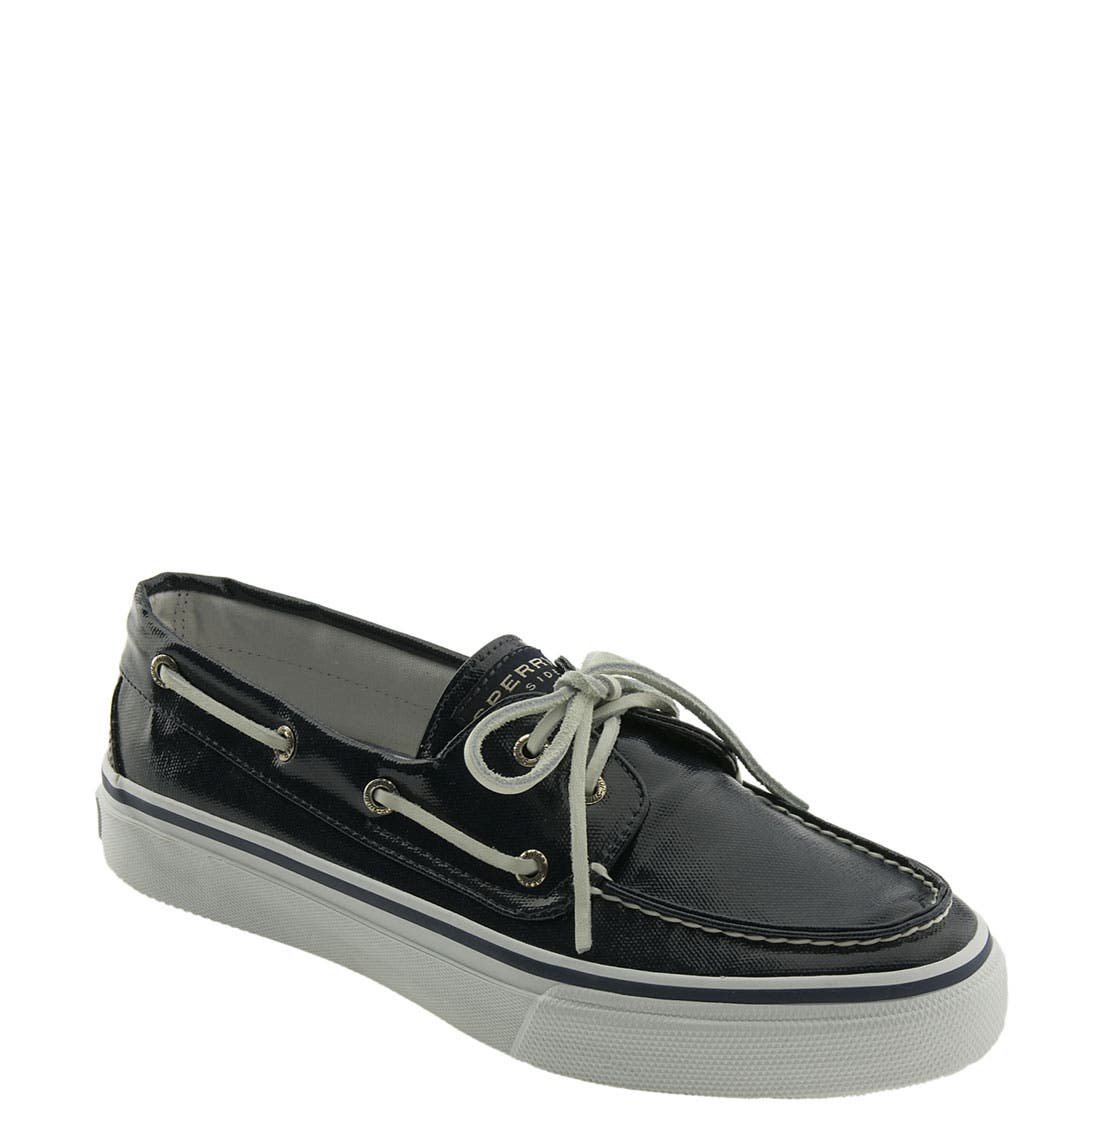 sperry top sider bahama